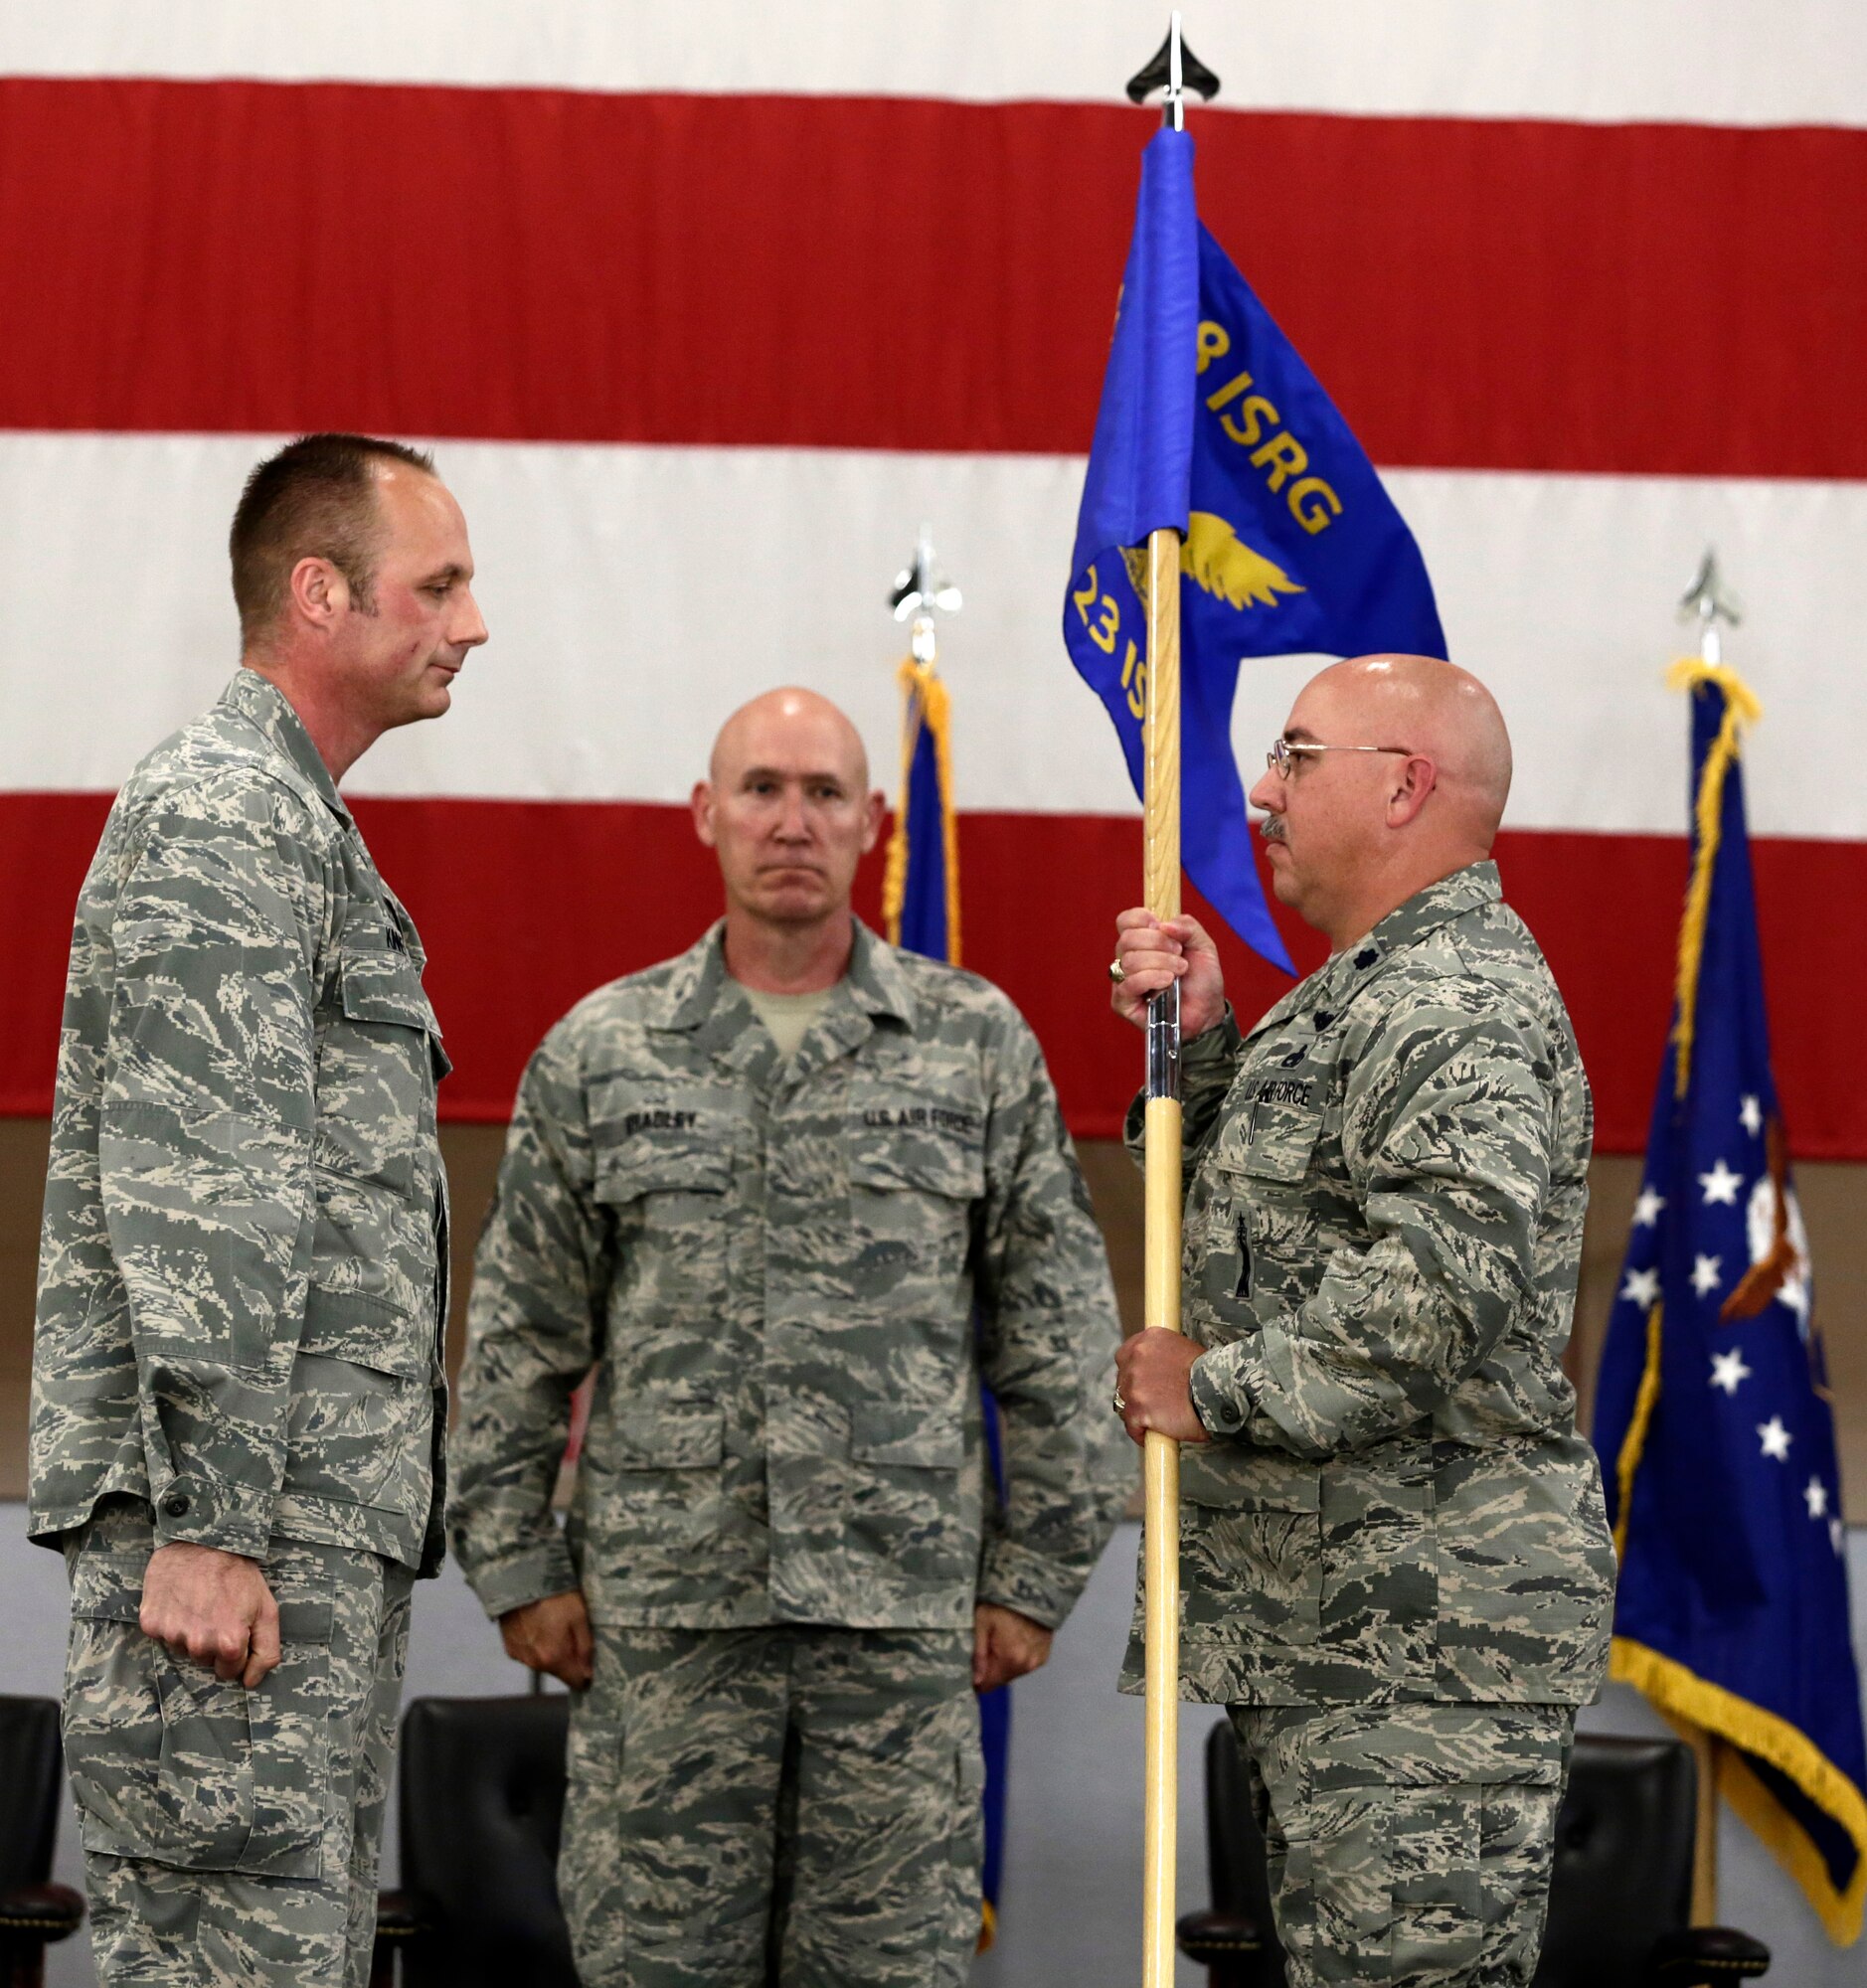 Lt. Col. John Easley, right, assumed command of the newly activated 223rd Intelligence Support Squadron during a Conversion Day ceremony held at Ebbing Air National Guard Base, Fort Smith, Arkansas, June 7, 2014. The 188th Fighter Wing was redesignated as the 188th Wing during the event. The ceremony also recognized the many changes occurring at the wing as a result of its conversion to a remotely piloted aircraft (MQ-9 Reapers) and intelligence, surveillance and reconnaissance mission. (U.S. Air National Guard photo by Master Sgt. Mark Moore)
